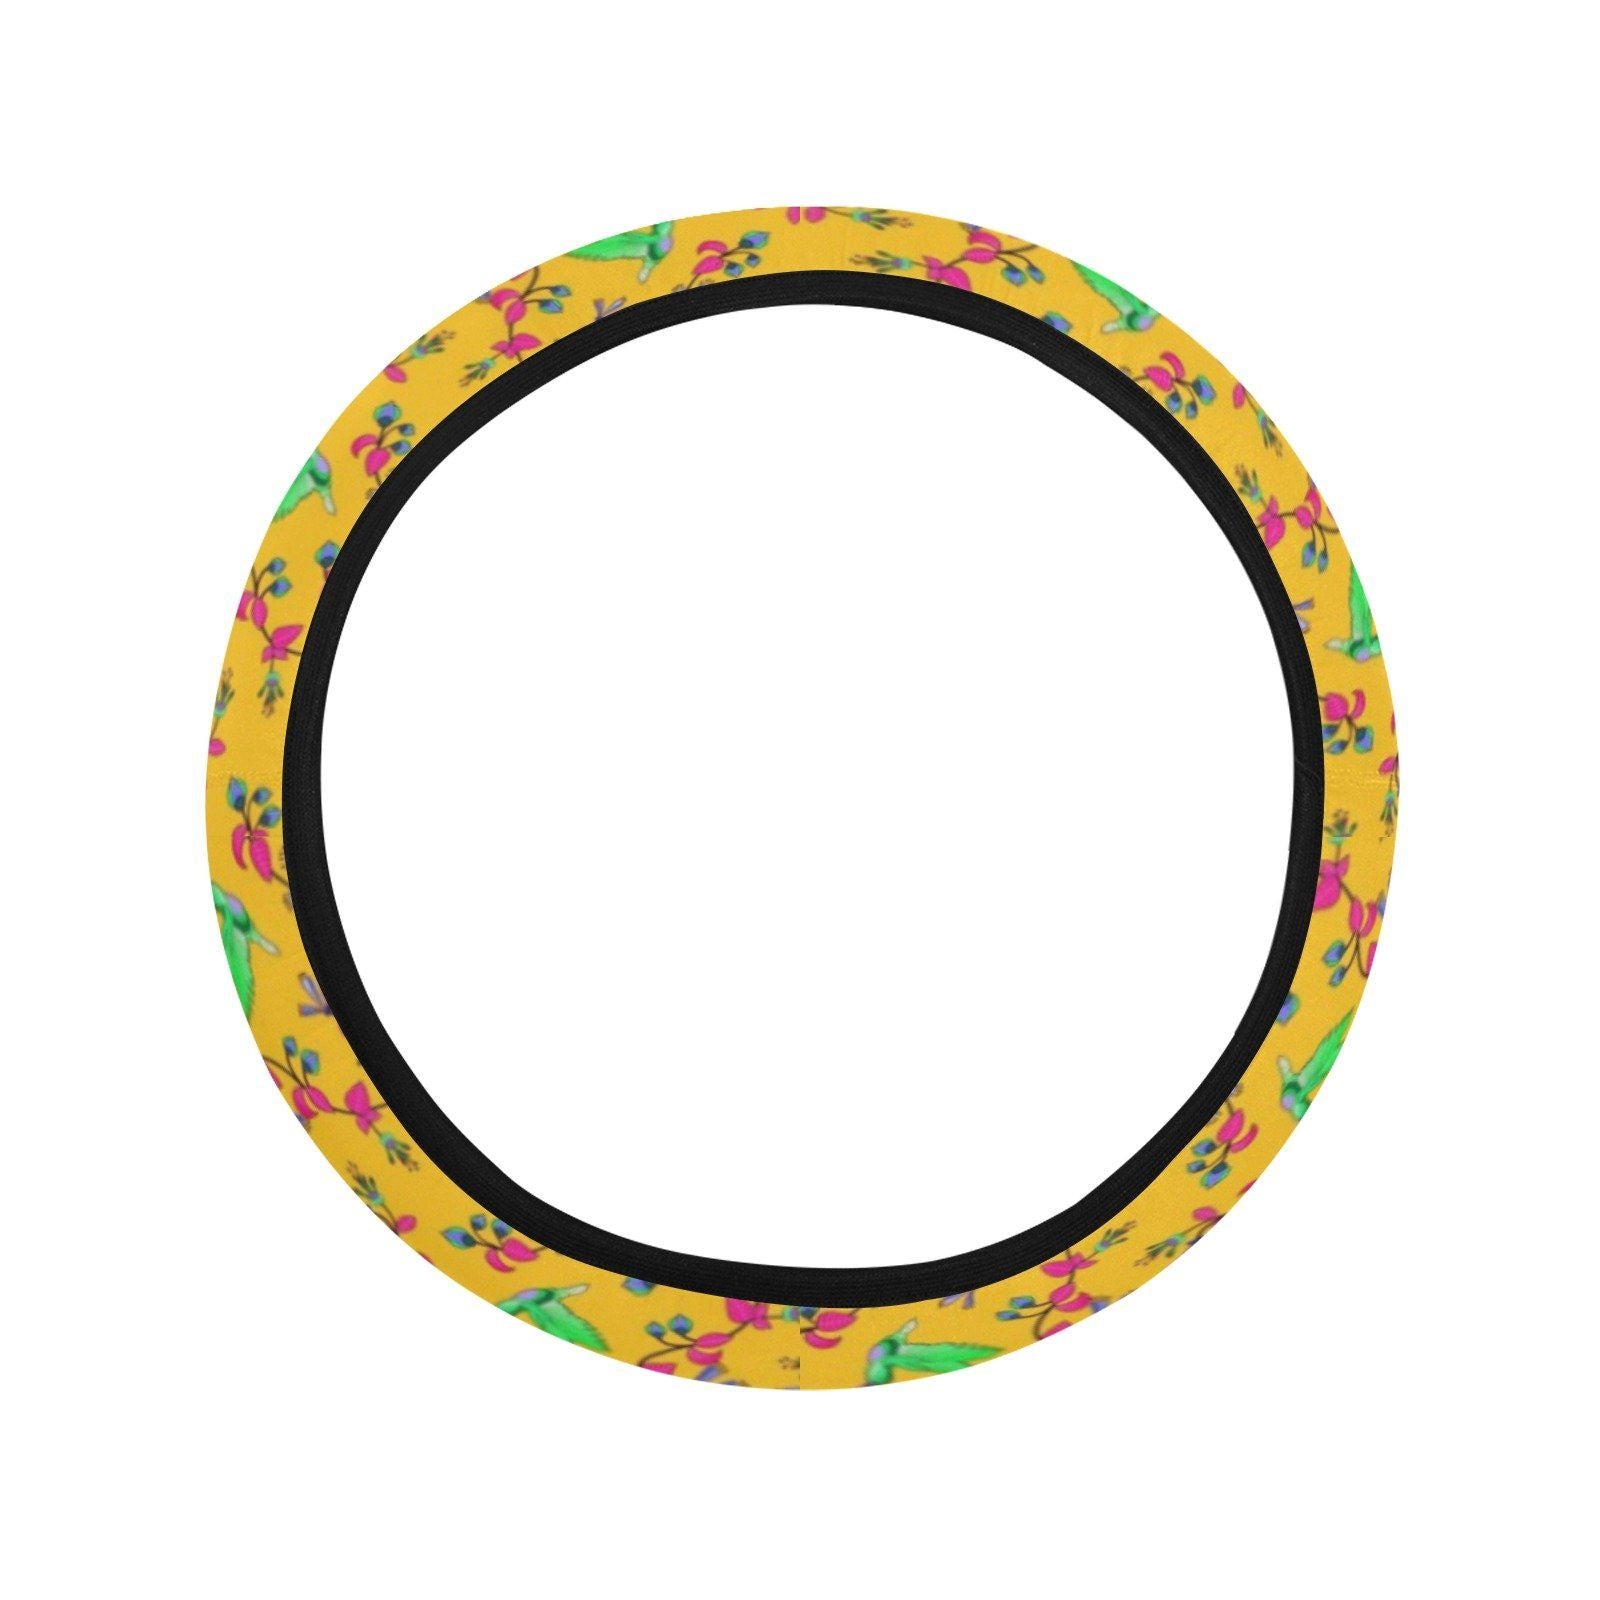 Swift Pastel Yellow Steering Wheel Cover with Elastic Edge Steering Wheel Cover with Elastic Edge e-joyer 